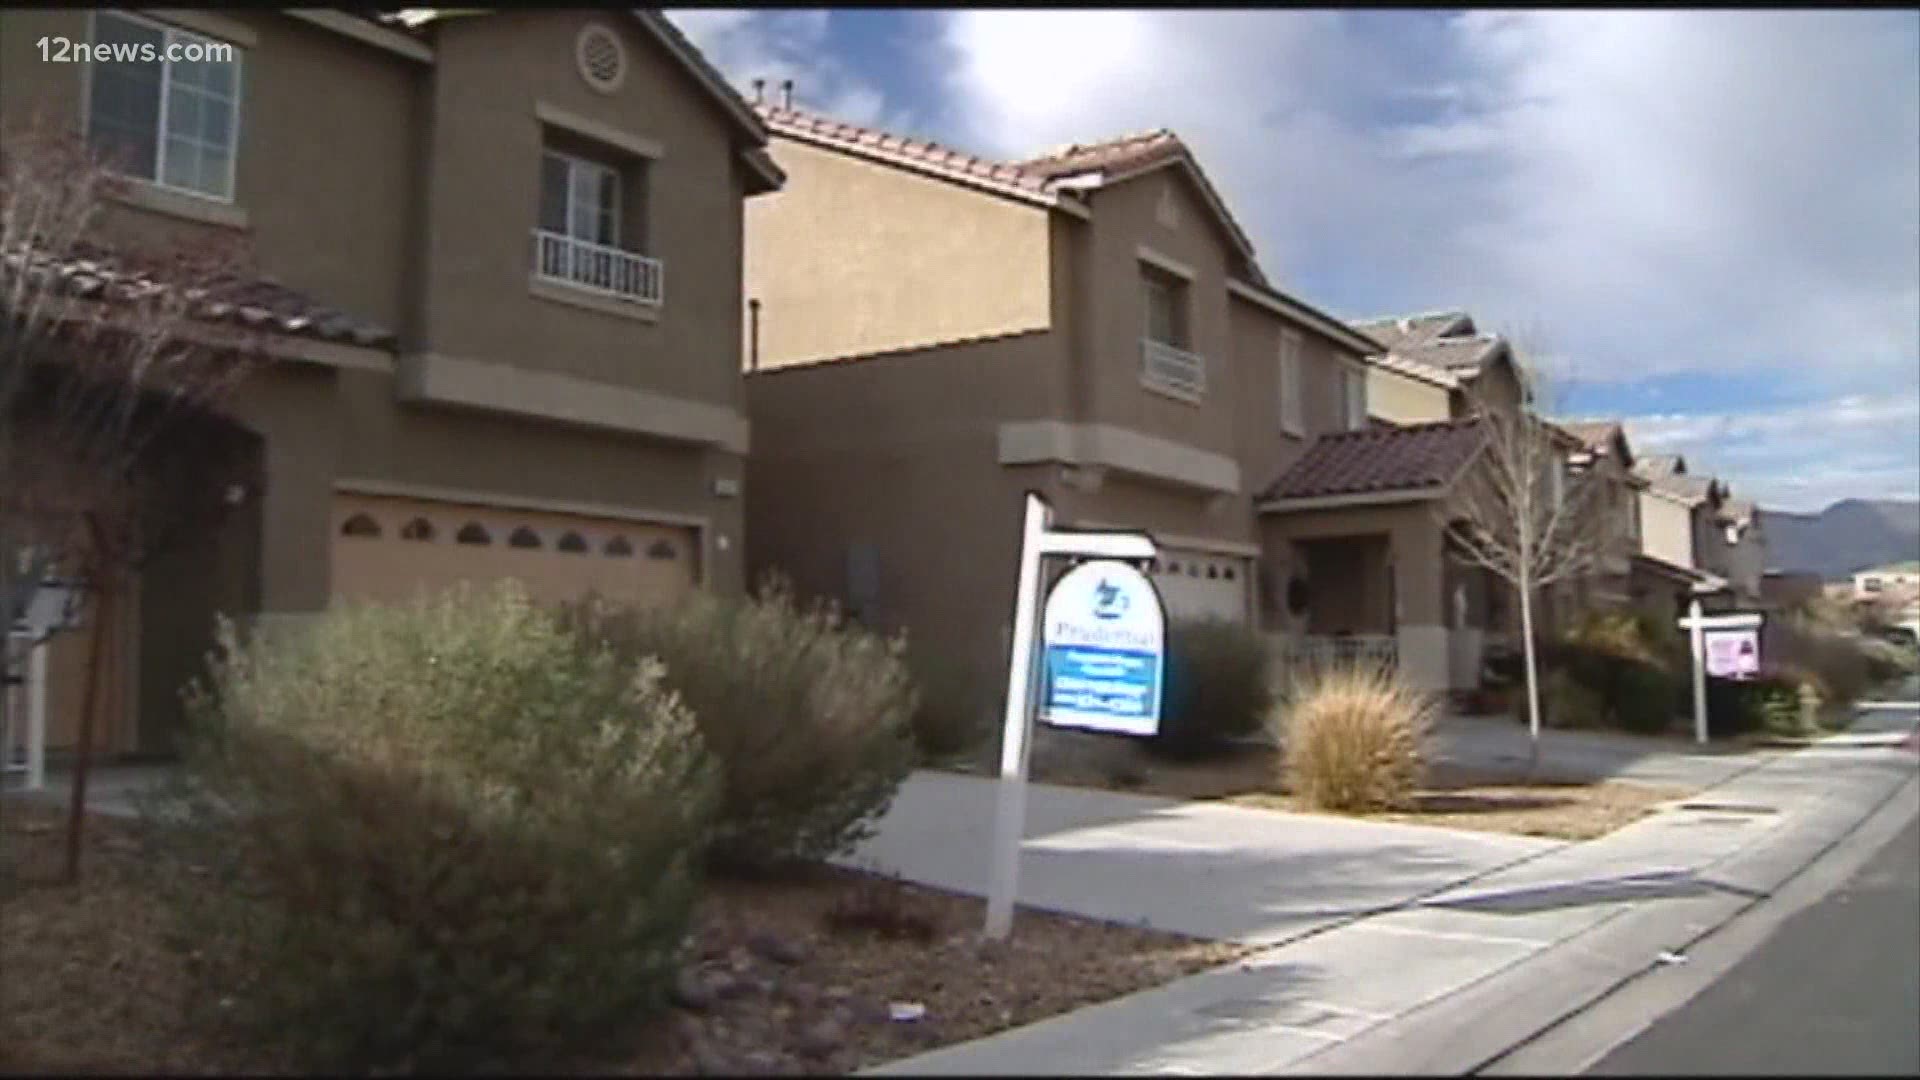 Phoenix is one of the top desired housing markets, even during the pandemic.